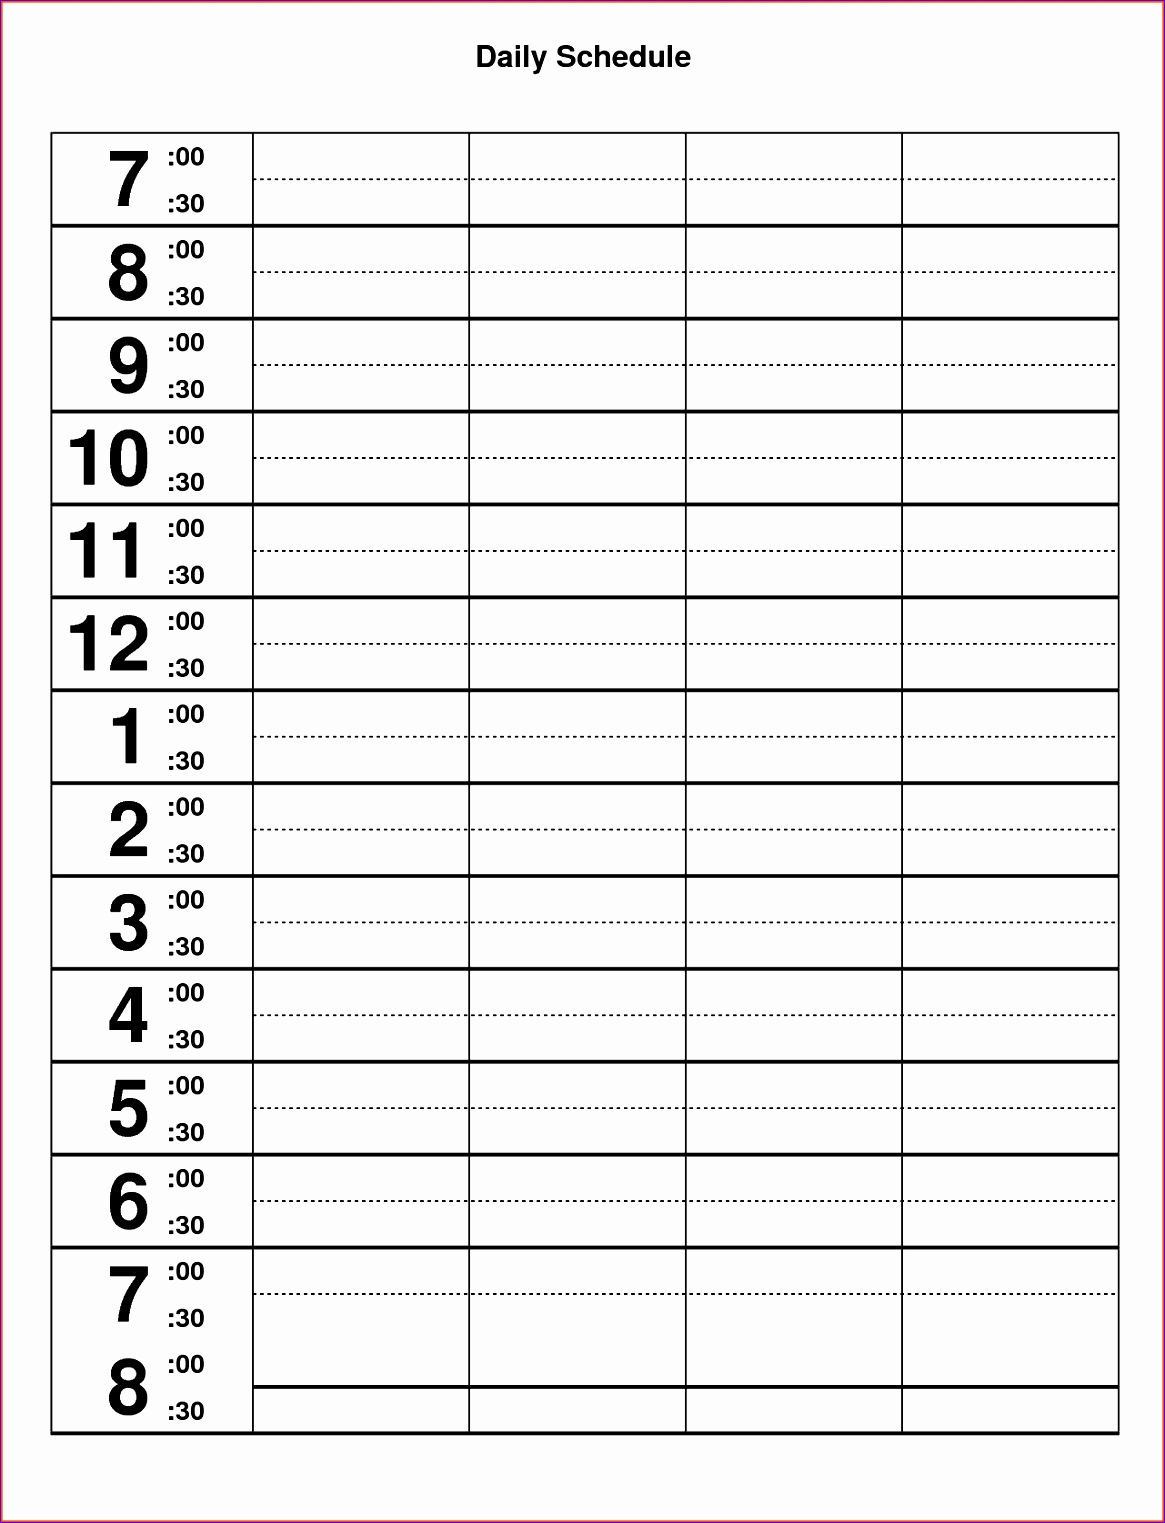 10 daily hourly schedule excel template event planning template 1